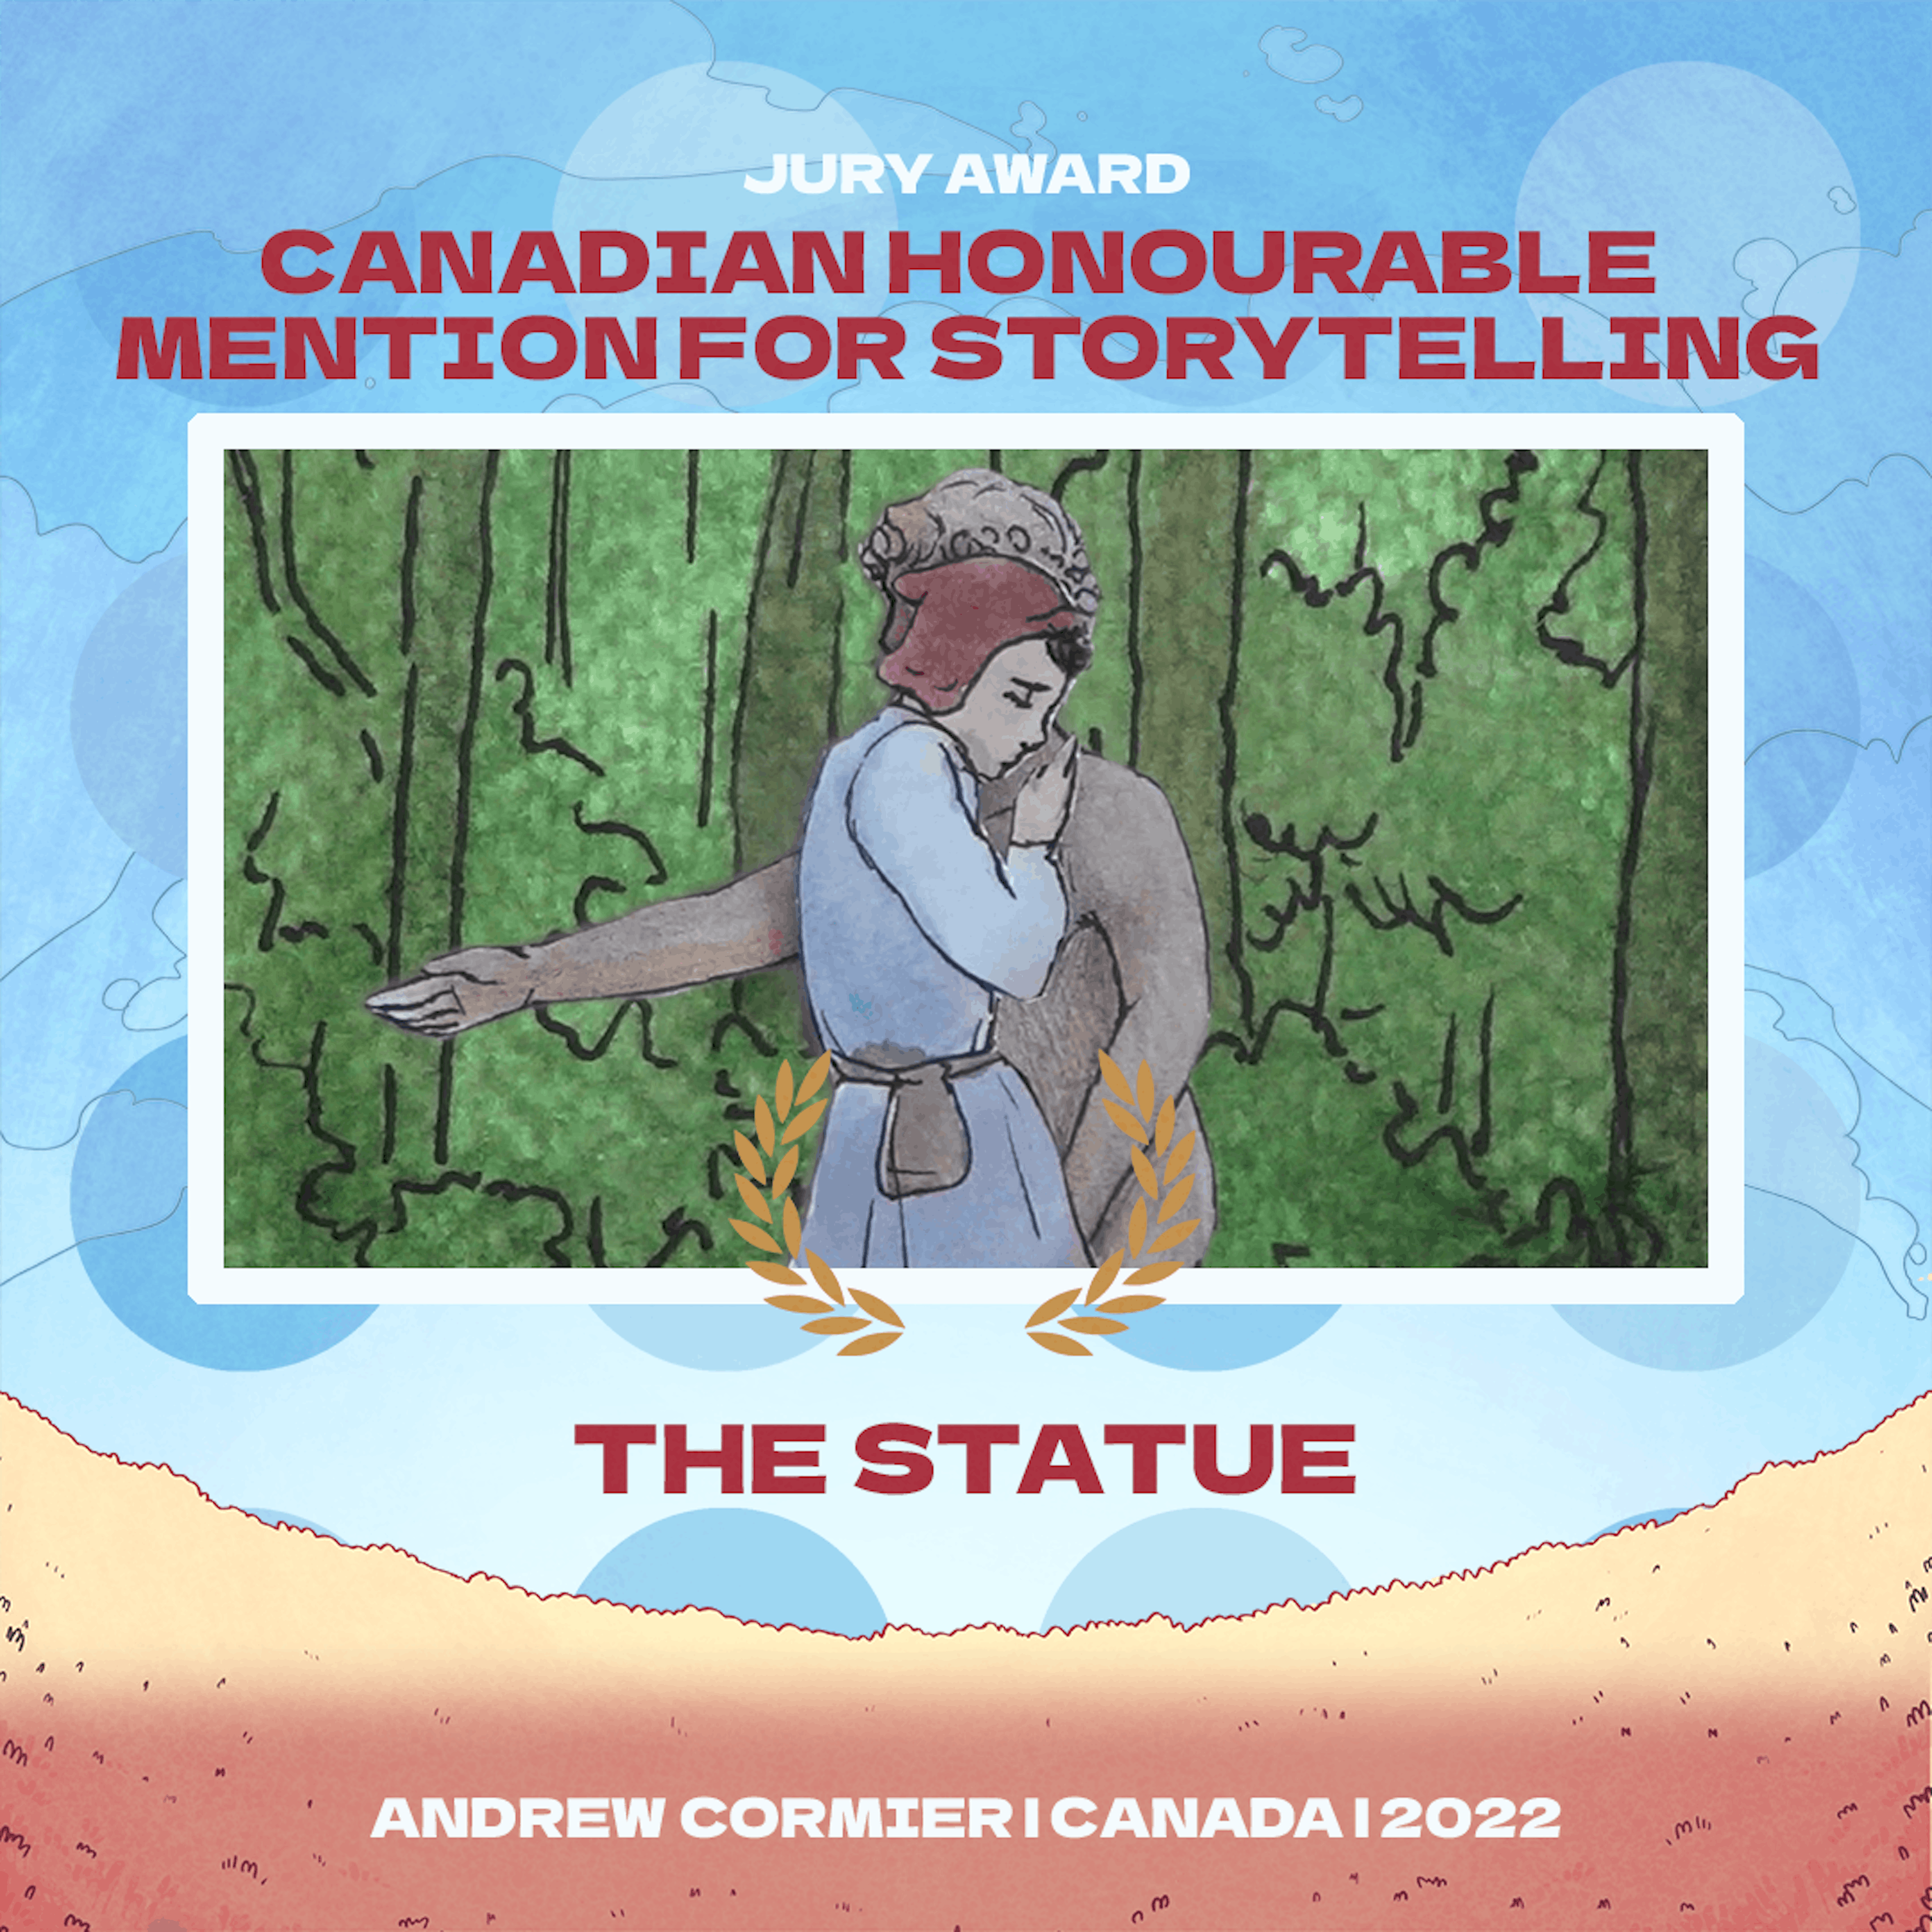 Text reads
"JURY AWARD
Canadian Honourable Mention for Storytelling
The State
Andrew Cormier Canada | 2022